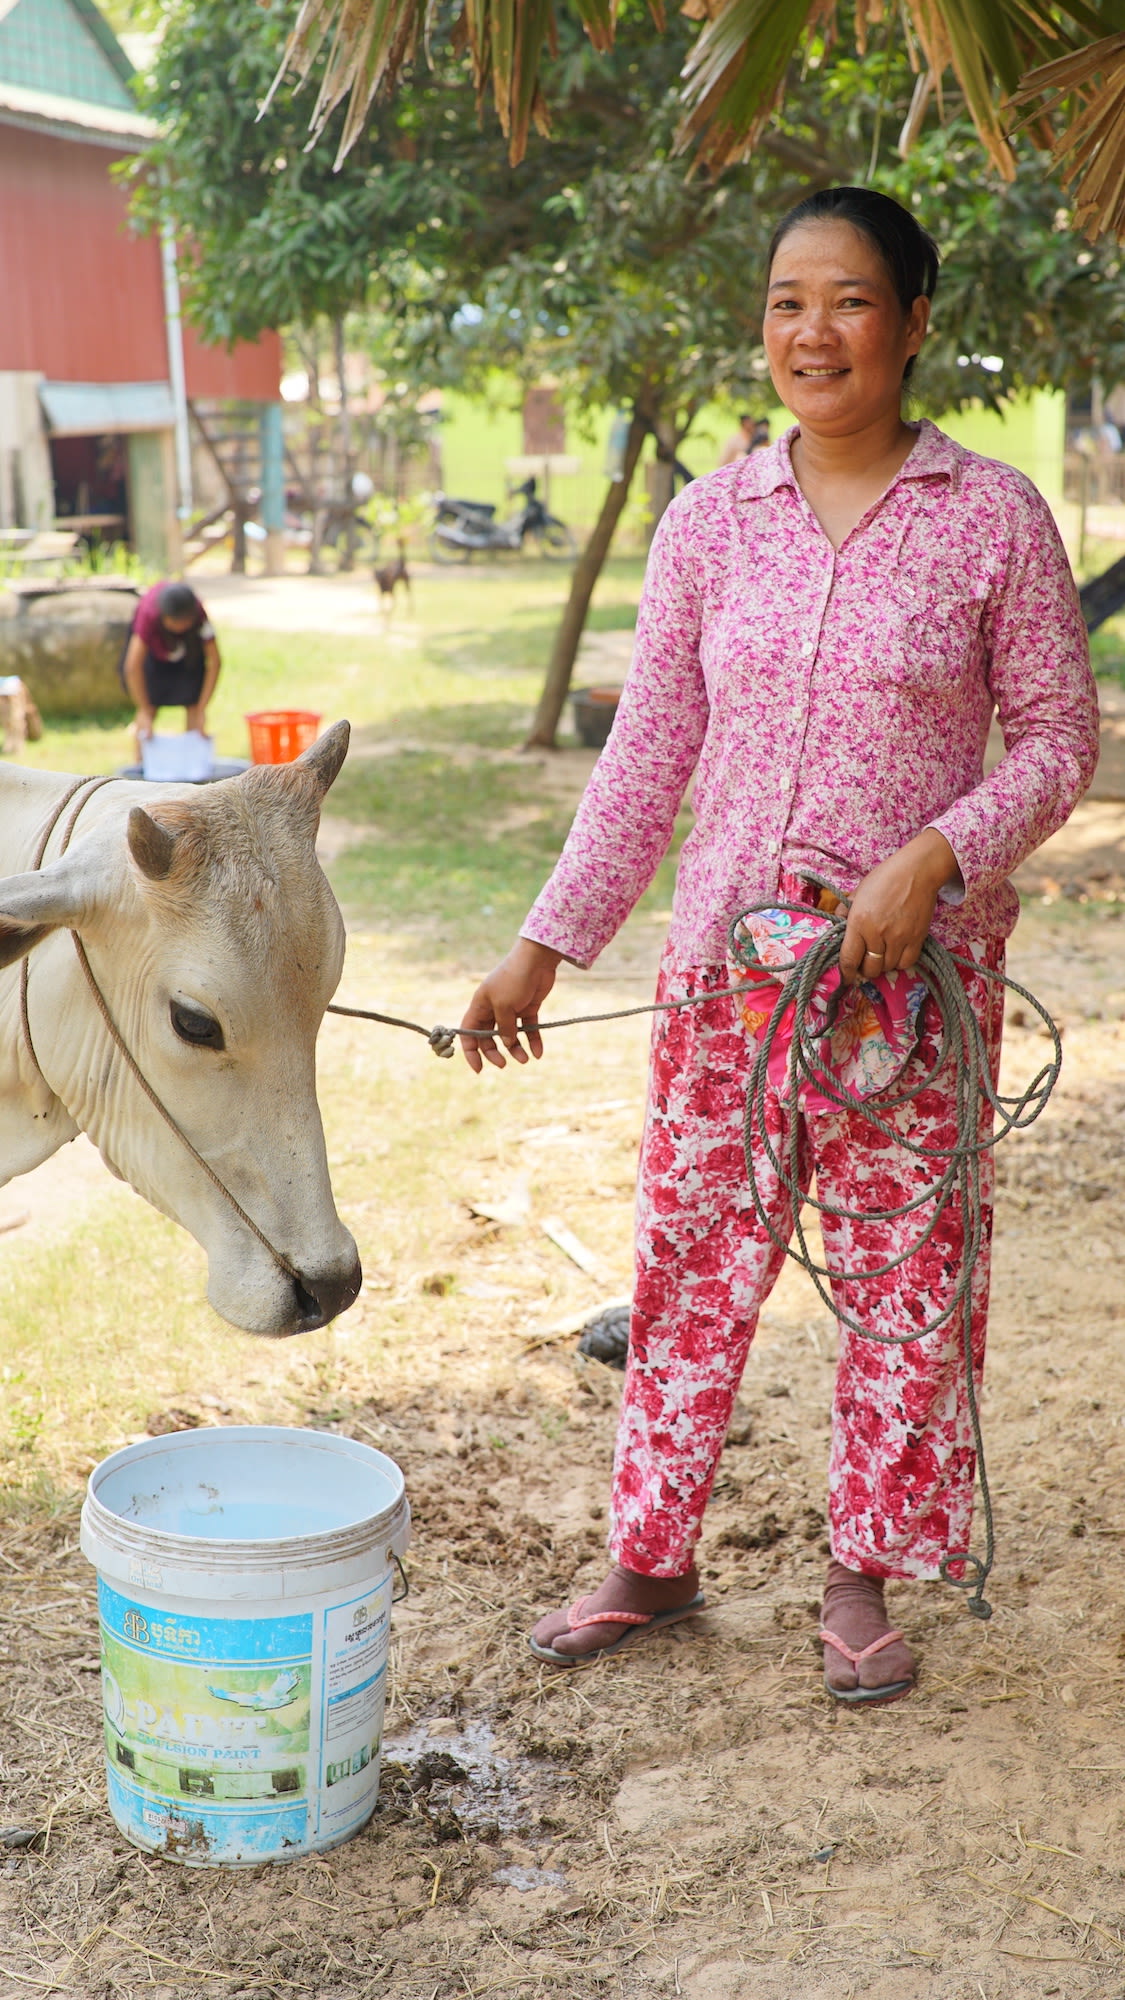 Thou's loan helped to purchase more rice seed and organic pesticides to improve her rice farmland and get a good yield.